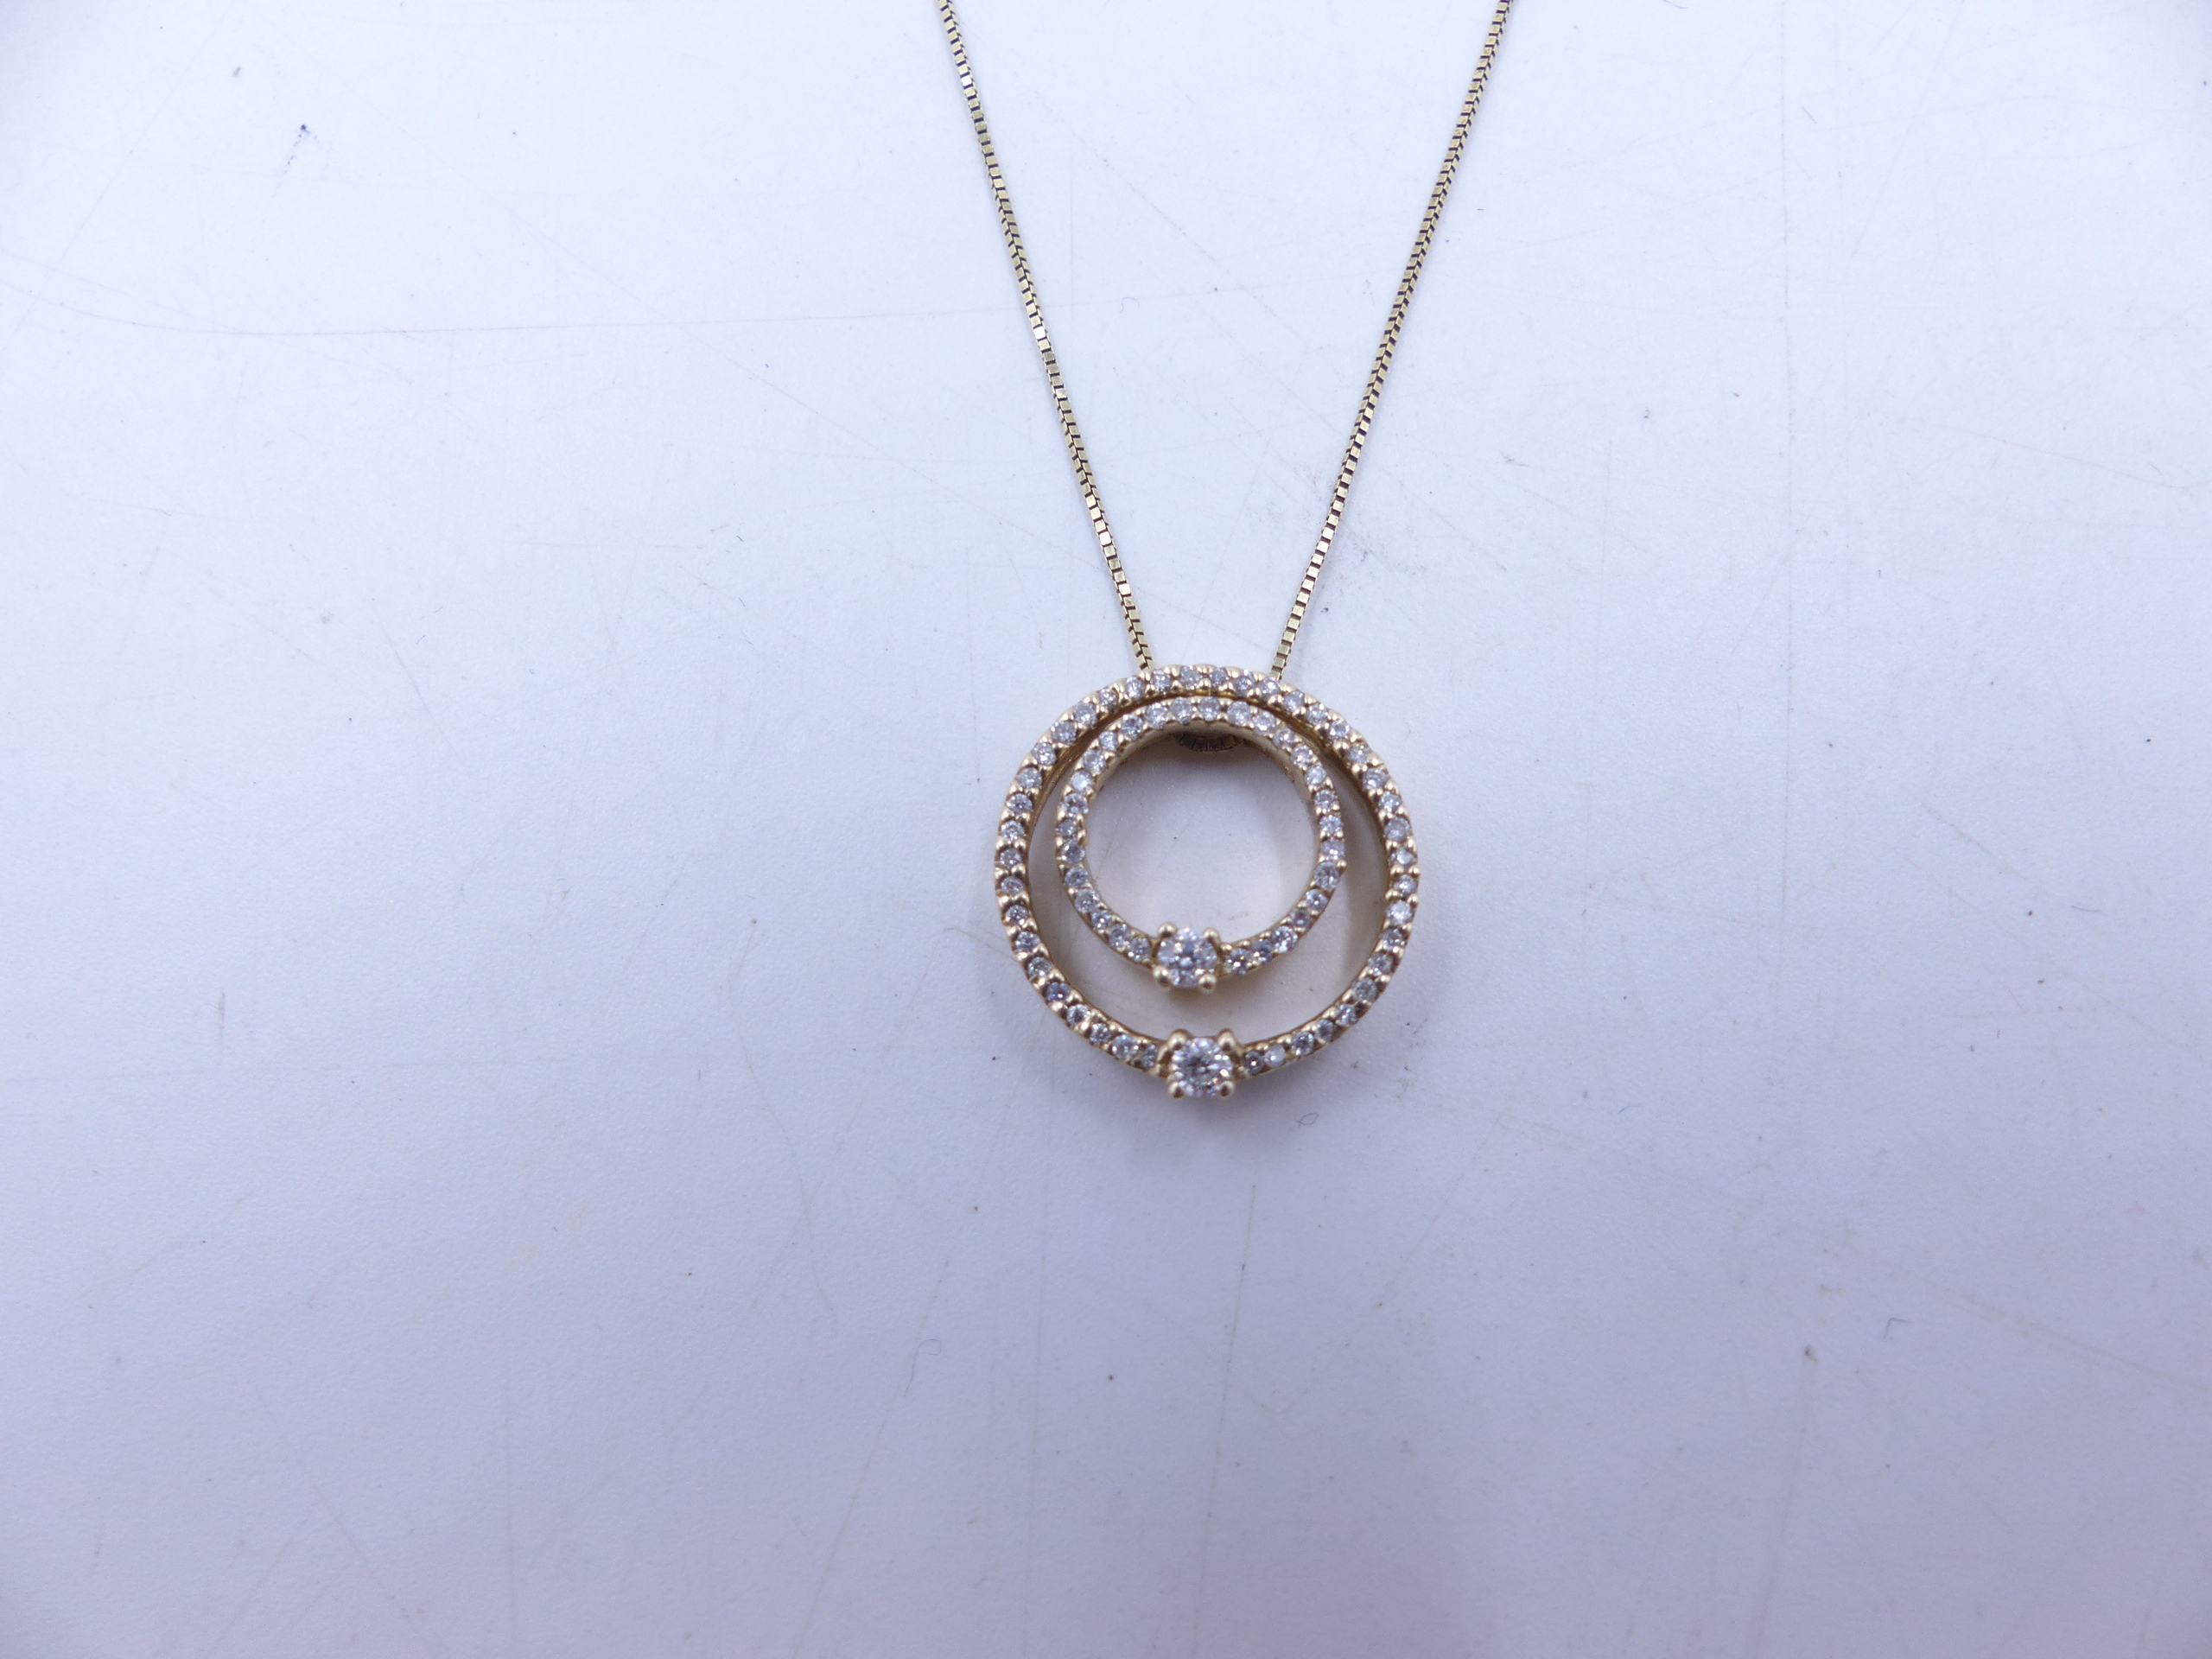 A 9ct YELLOW GOLD DOUBLE DIAMOND HALO PENDANT. TWO HALOS OF DIAMONDS ARE NESTED TOGETHER AND